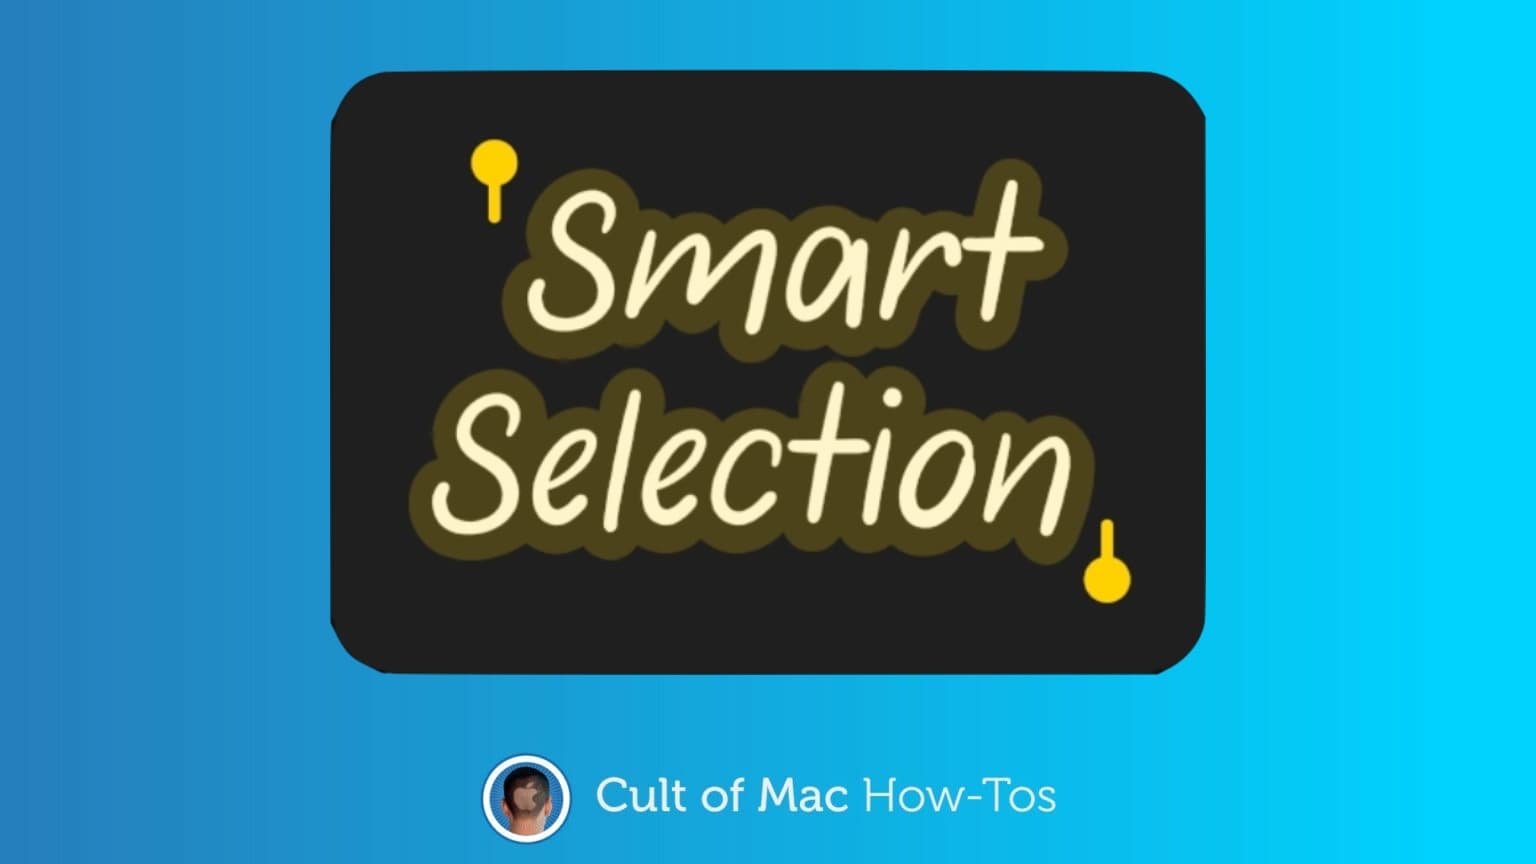 How to use Smart Selection in iPadOS 14